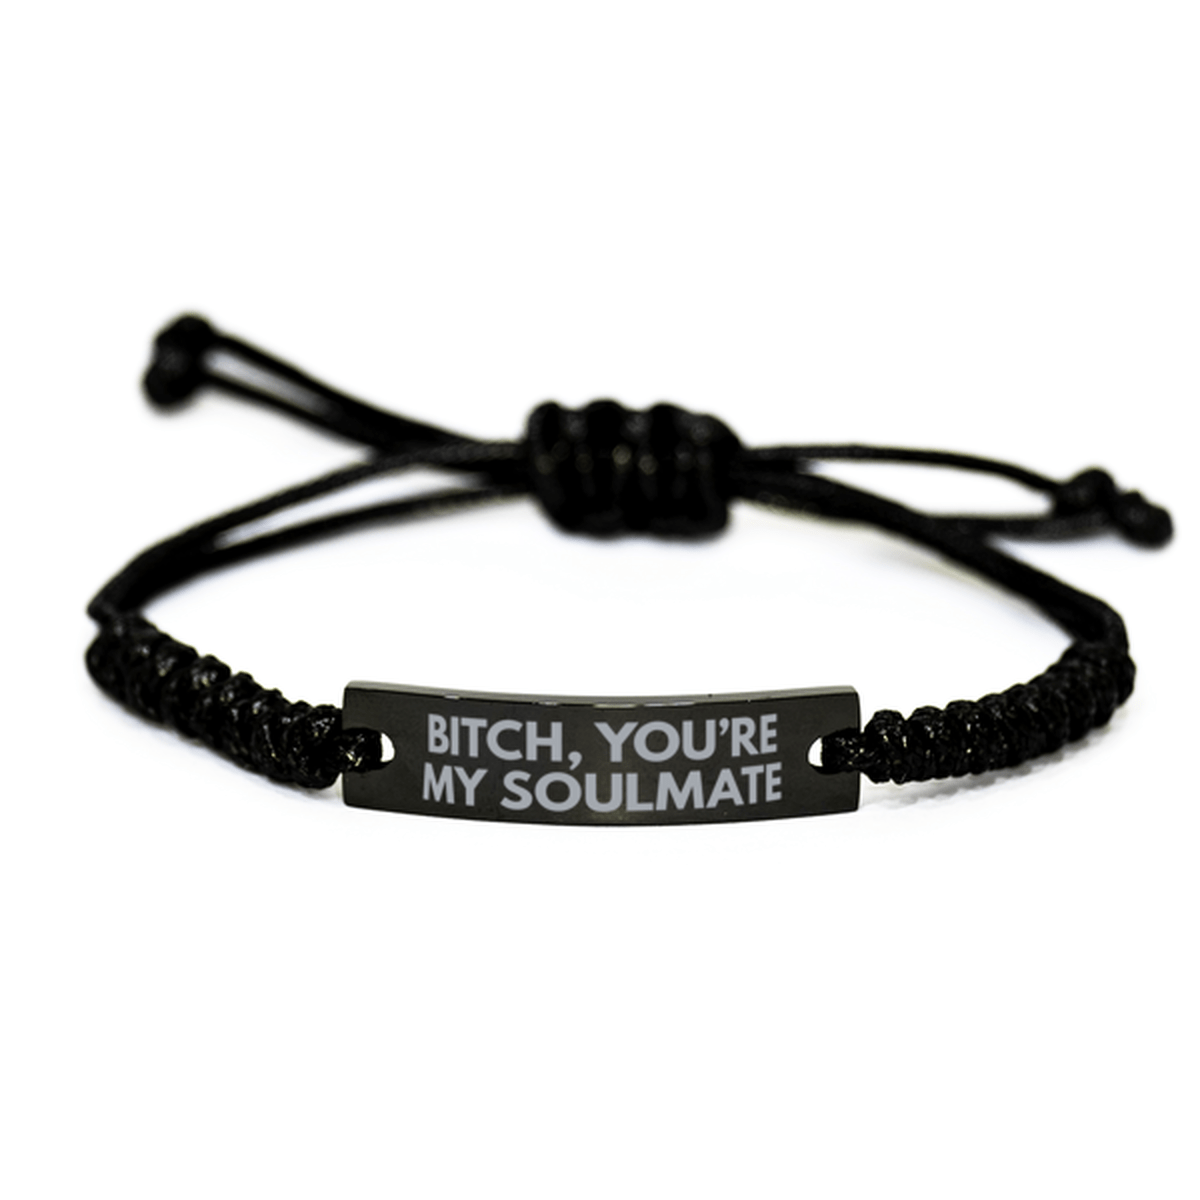 Unbiological Sister Gift - Bitch You're My Soulmate - Black Rope Bracelet for Birthday or Christmas - Jewelry Gift for Best Friend, Bestie, BFF